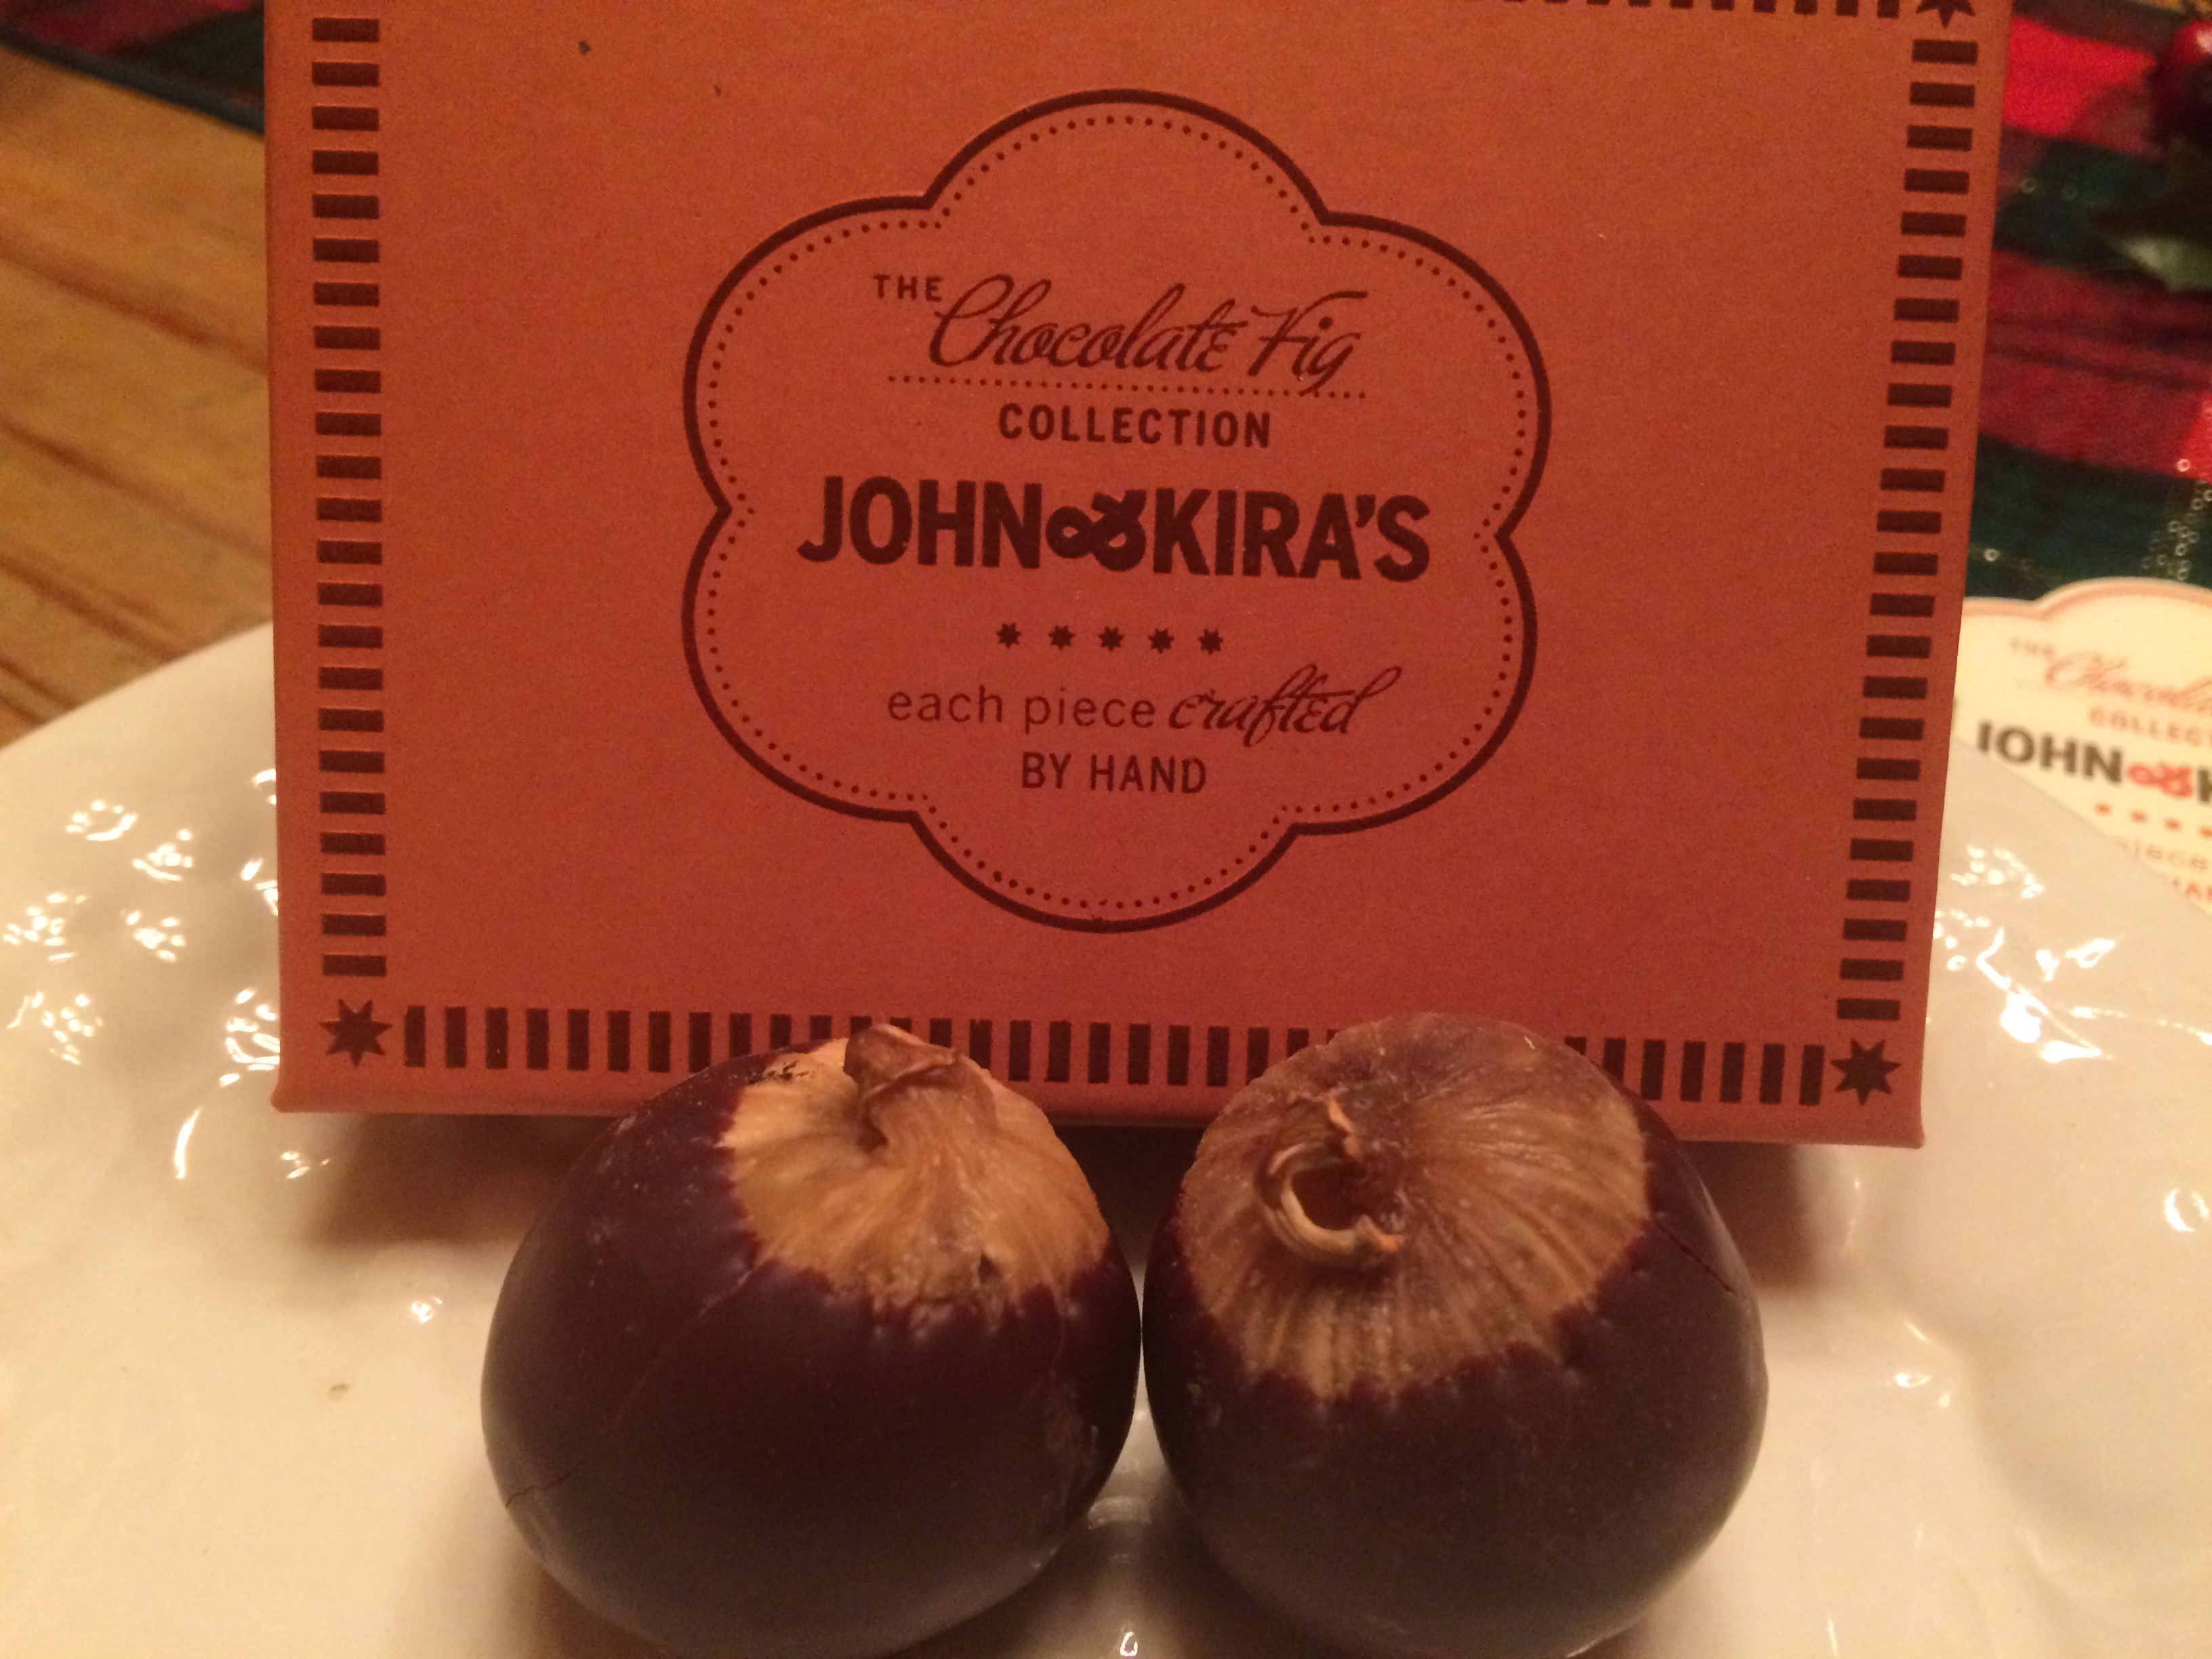 John & Kira's figs -- Proof there is a God.